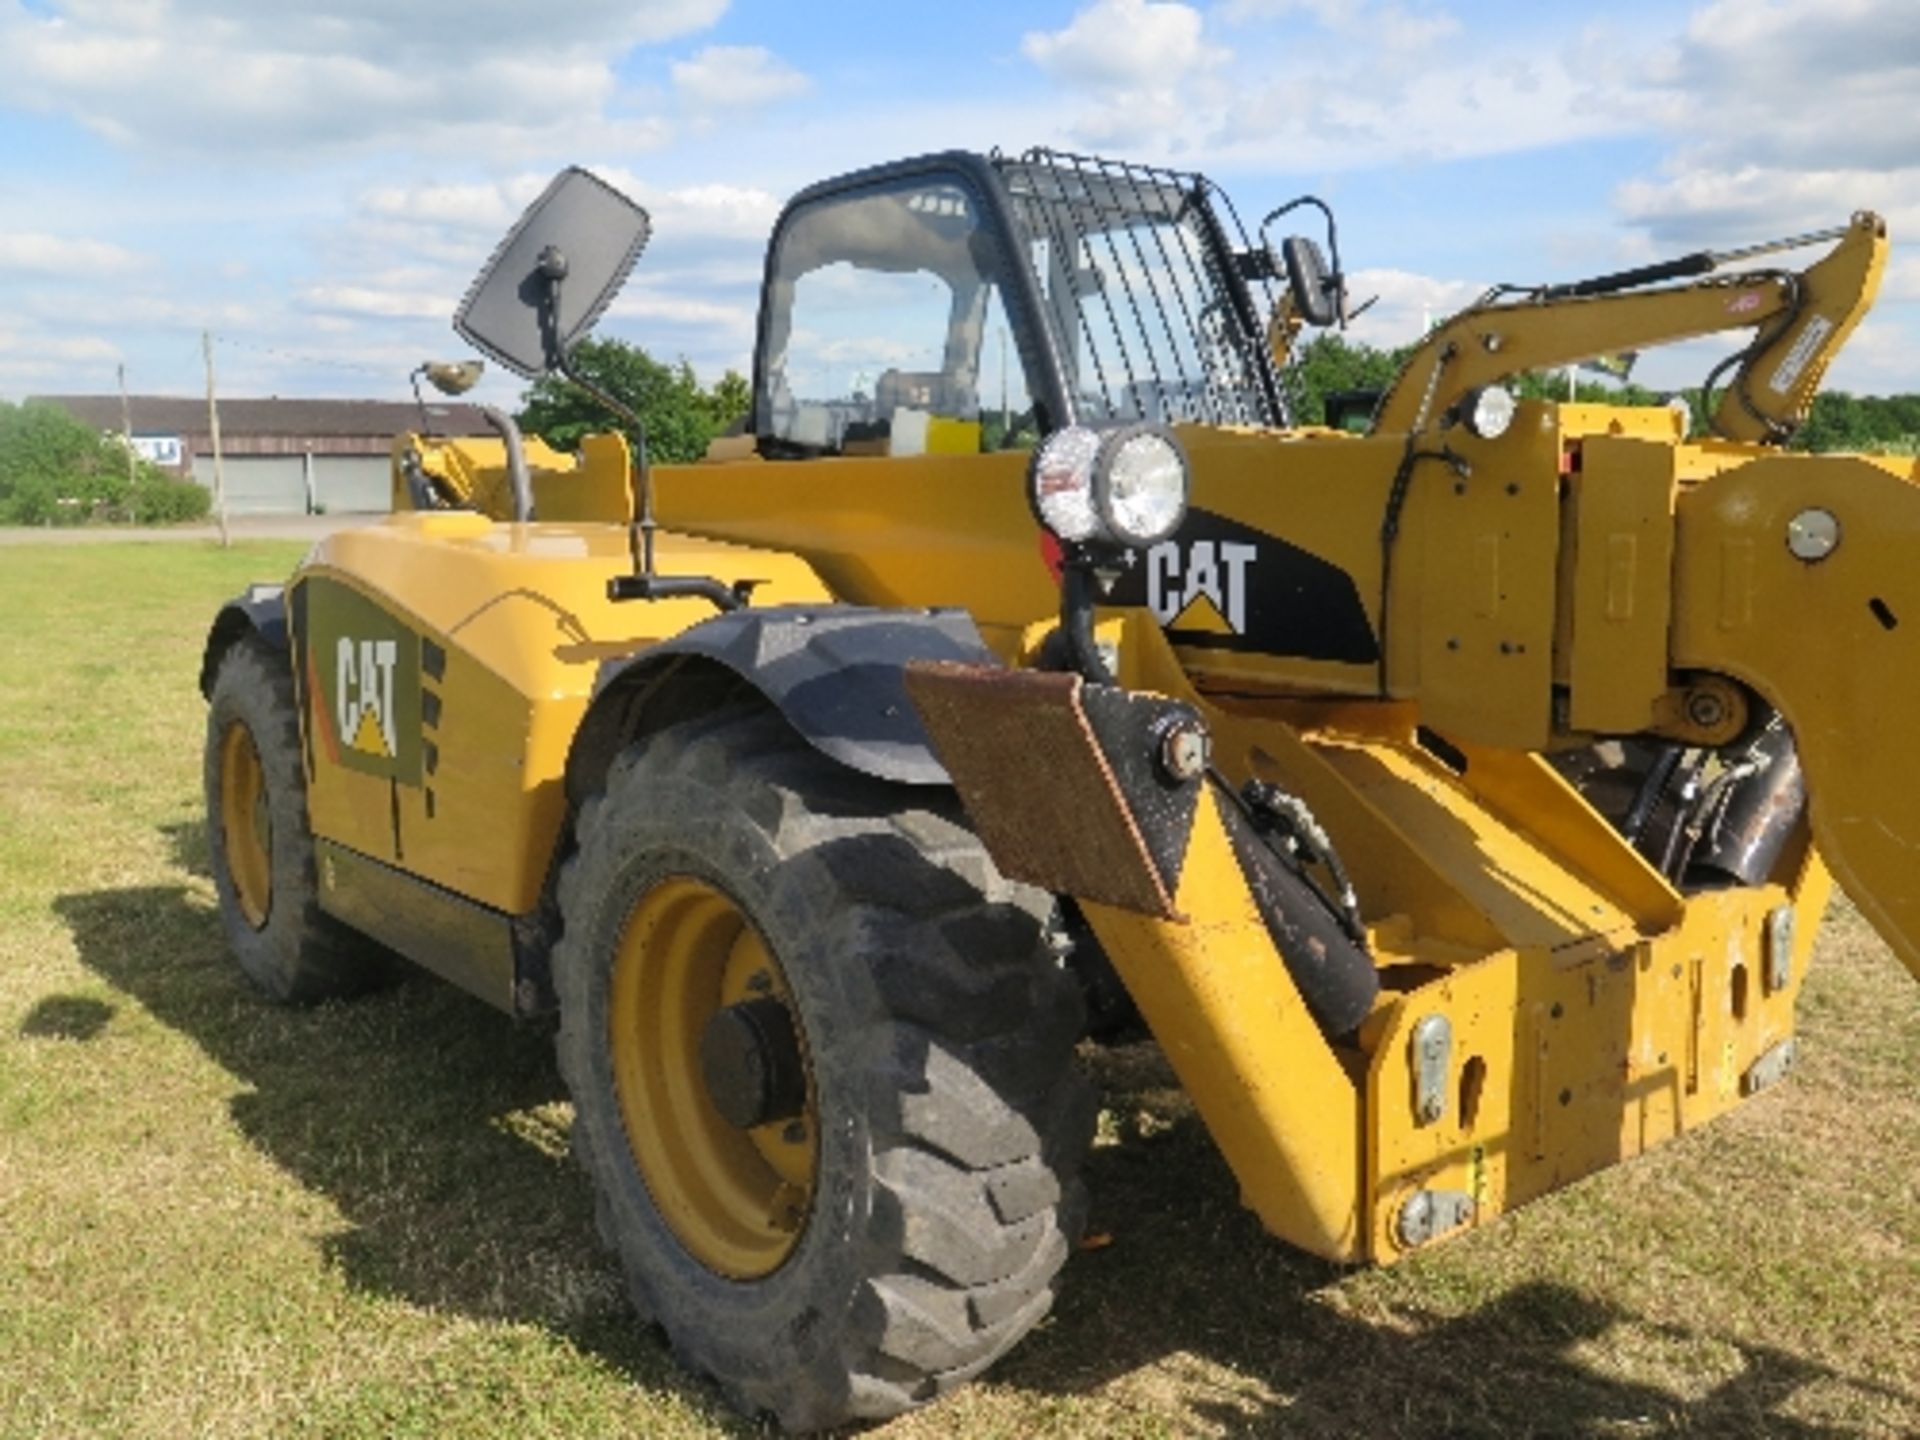 Caterpillar TH414STD telehandler 2,488 hrs 2011 TBZ00704
This lot is included by kind permission of - Image 4 of 6